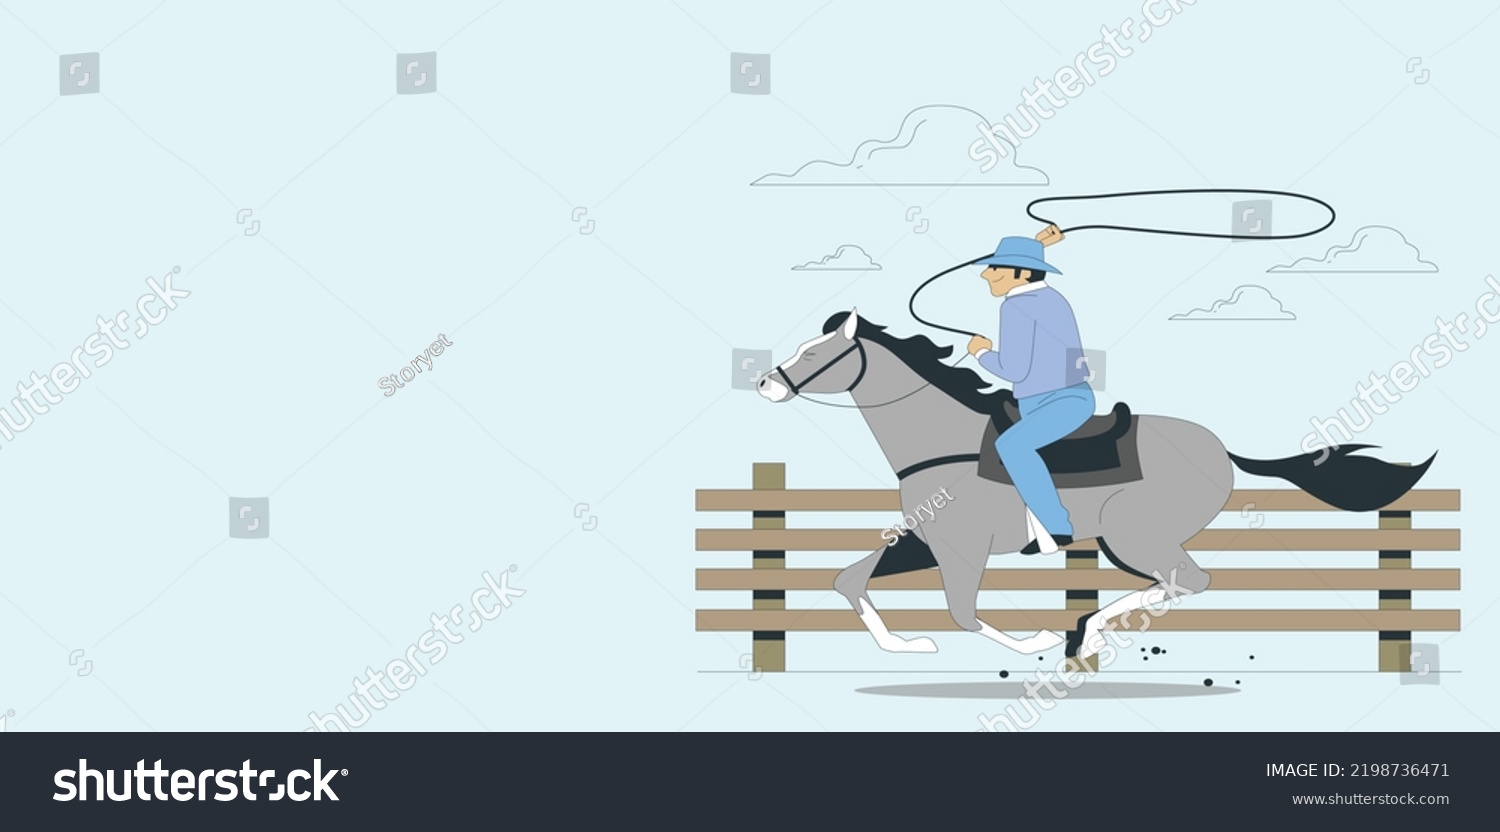 SVG of Stylized cowboy riding a horse and roping. Cowboy rides a horse and throws a lasso. Cowboy on the rodeo. Vector silhouette illustration. Cowboy practicing her equestrian sport with his horse. svg